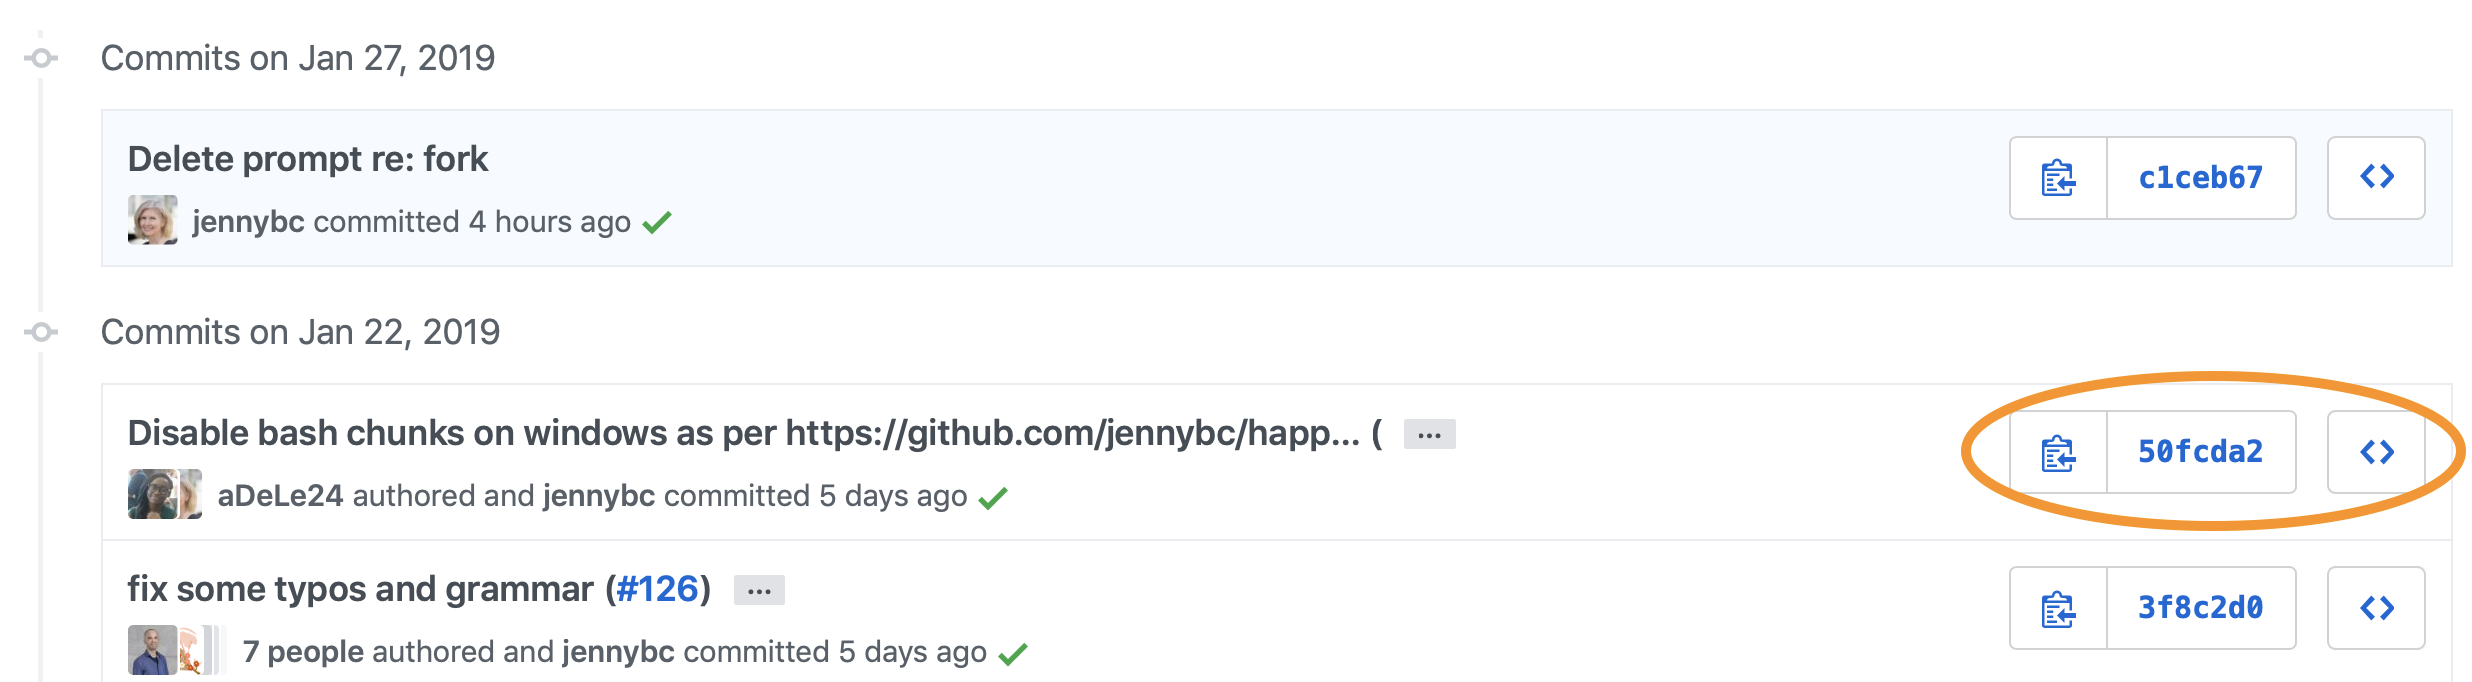 Example of a commit listing on GitHub.